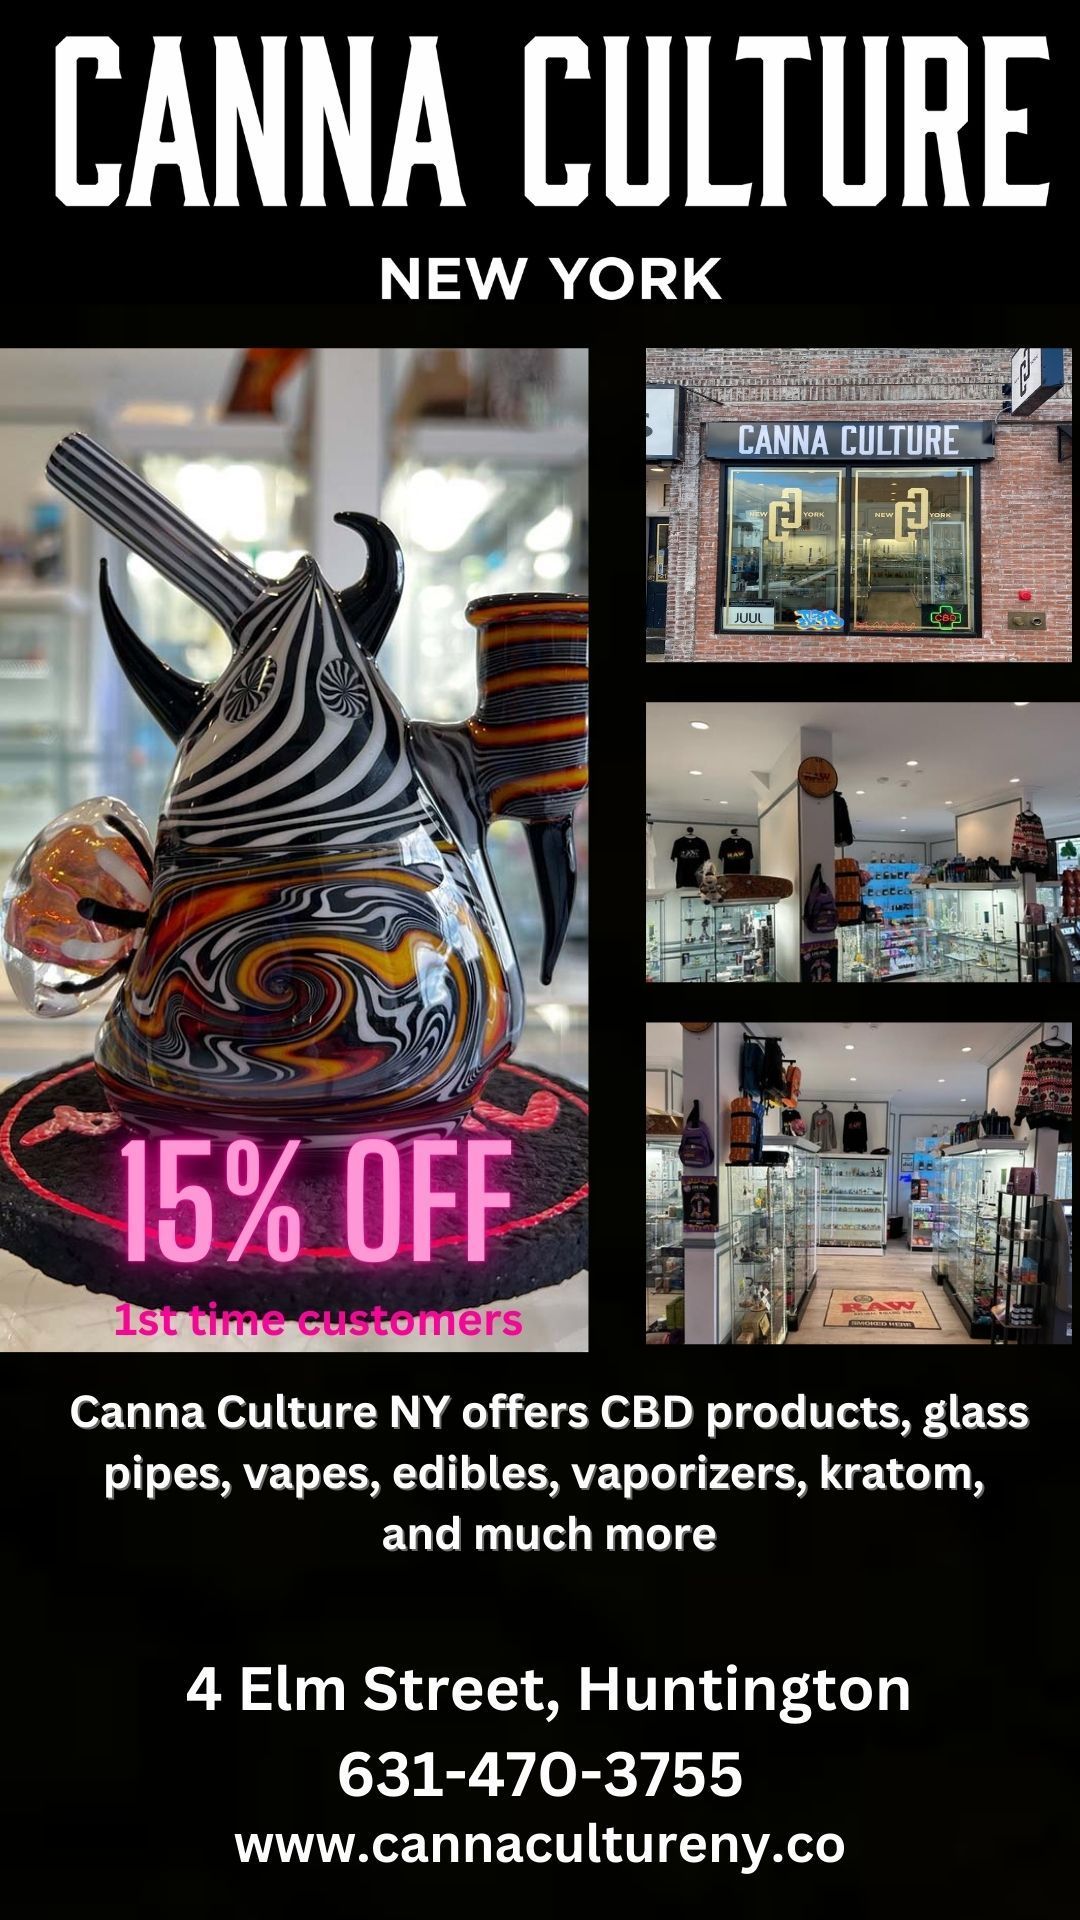 An advertisement for canna culture in new york